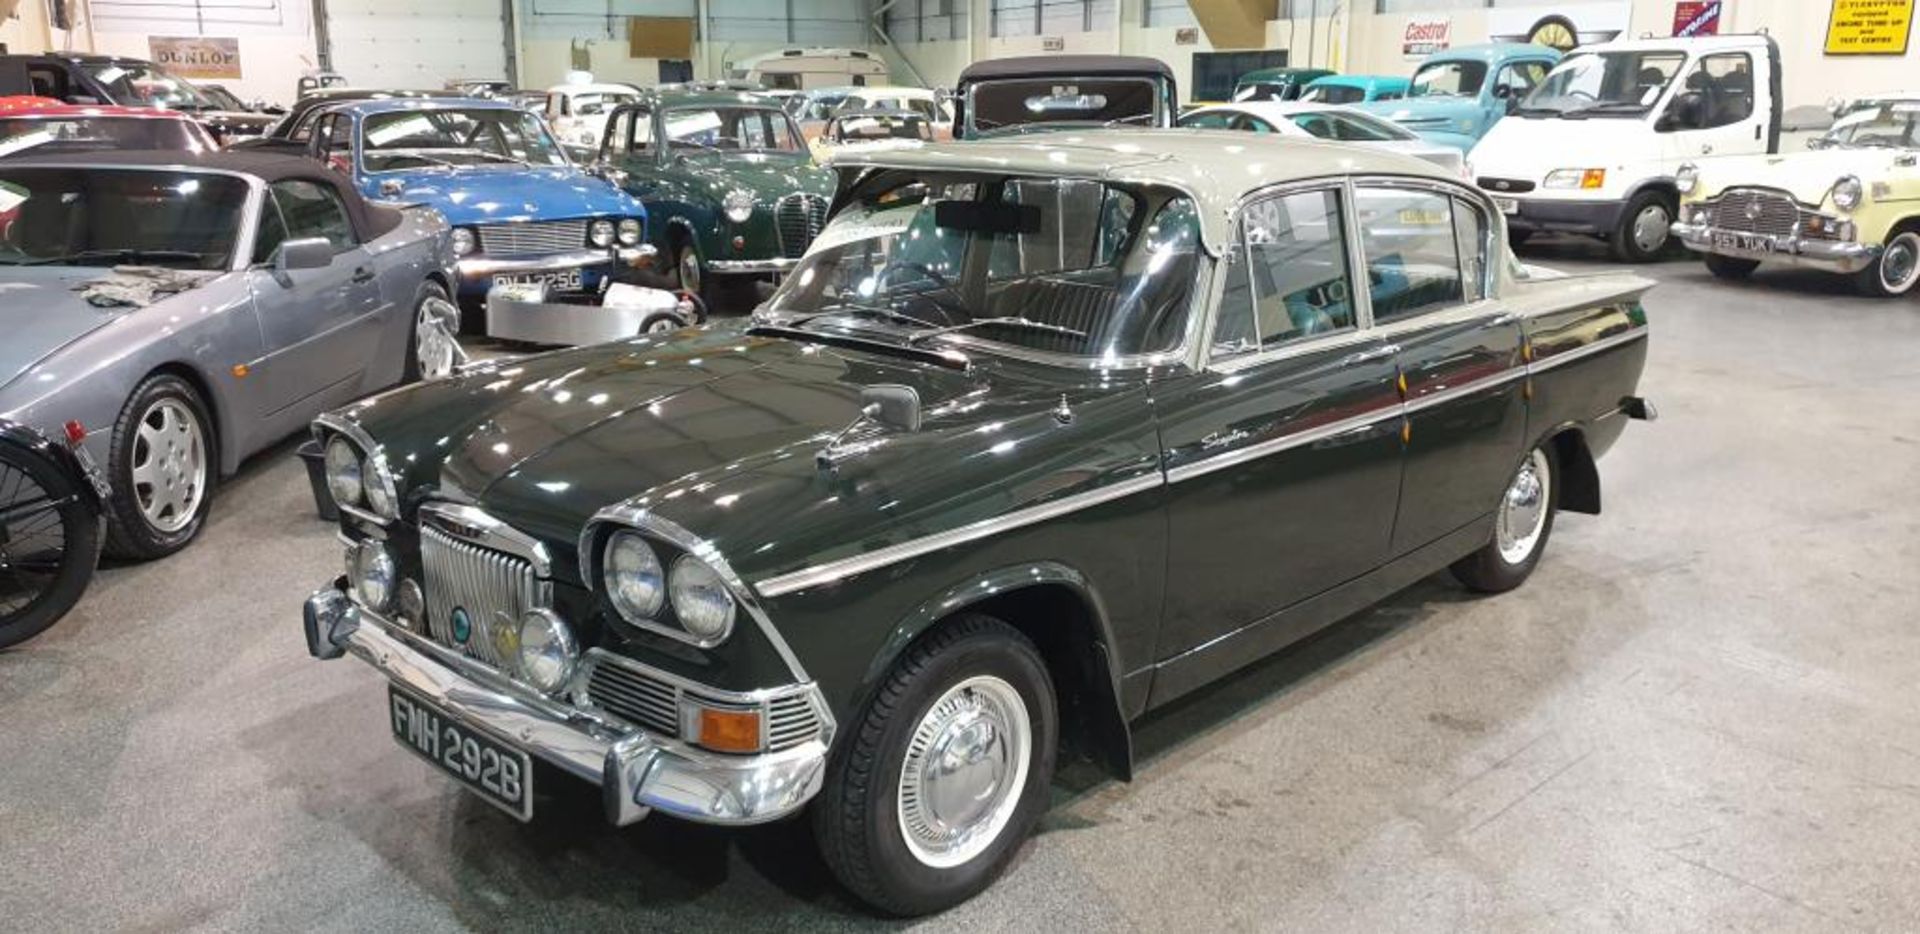 1964 Humber Sceptre - Image 2 of 2